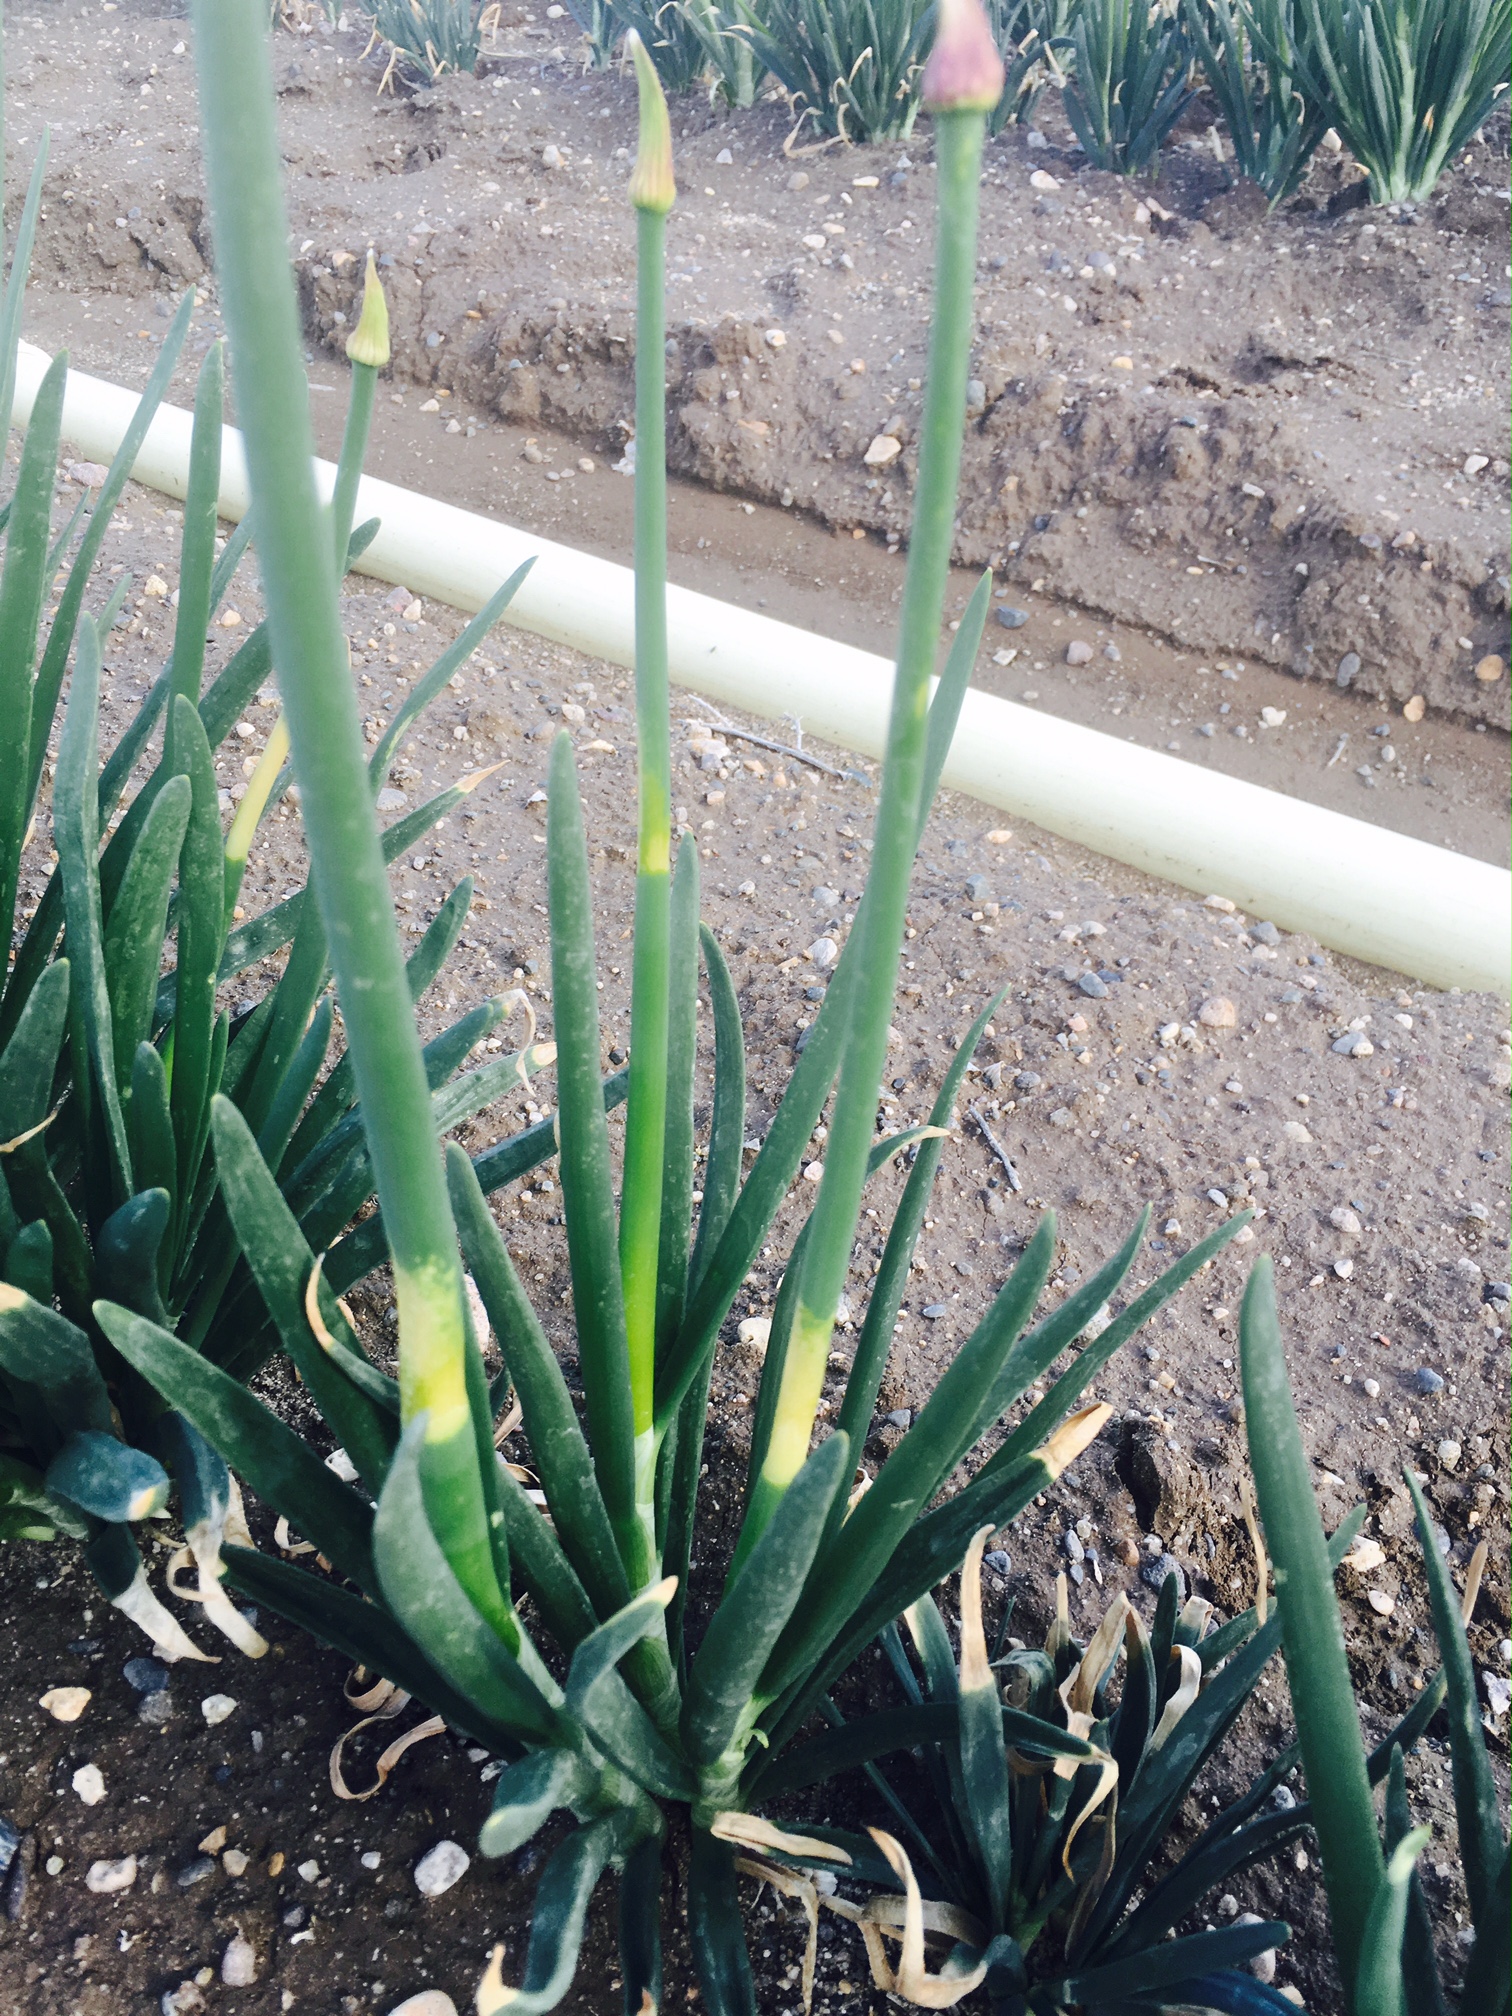 Injury to an onion seed crop as a result of drift of the herbicide Roundup (glyphosate) from an adjacent field. Note the stark, chlorotic (yellow) band across the scapes and the necrotic (dead) band of tissue at the ends of some of the leaves, indicating the stage of growth of the crop at the time the drift occurred